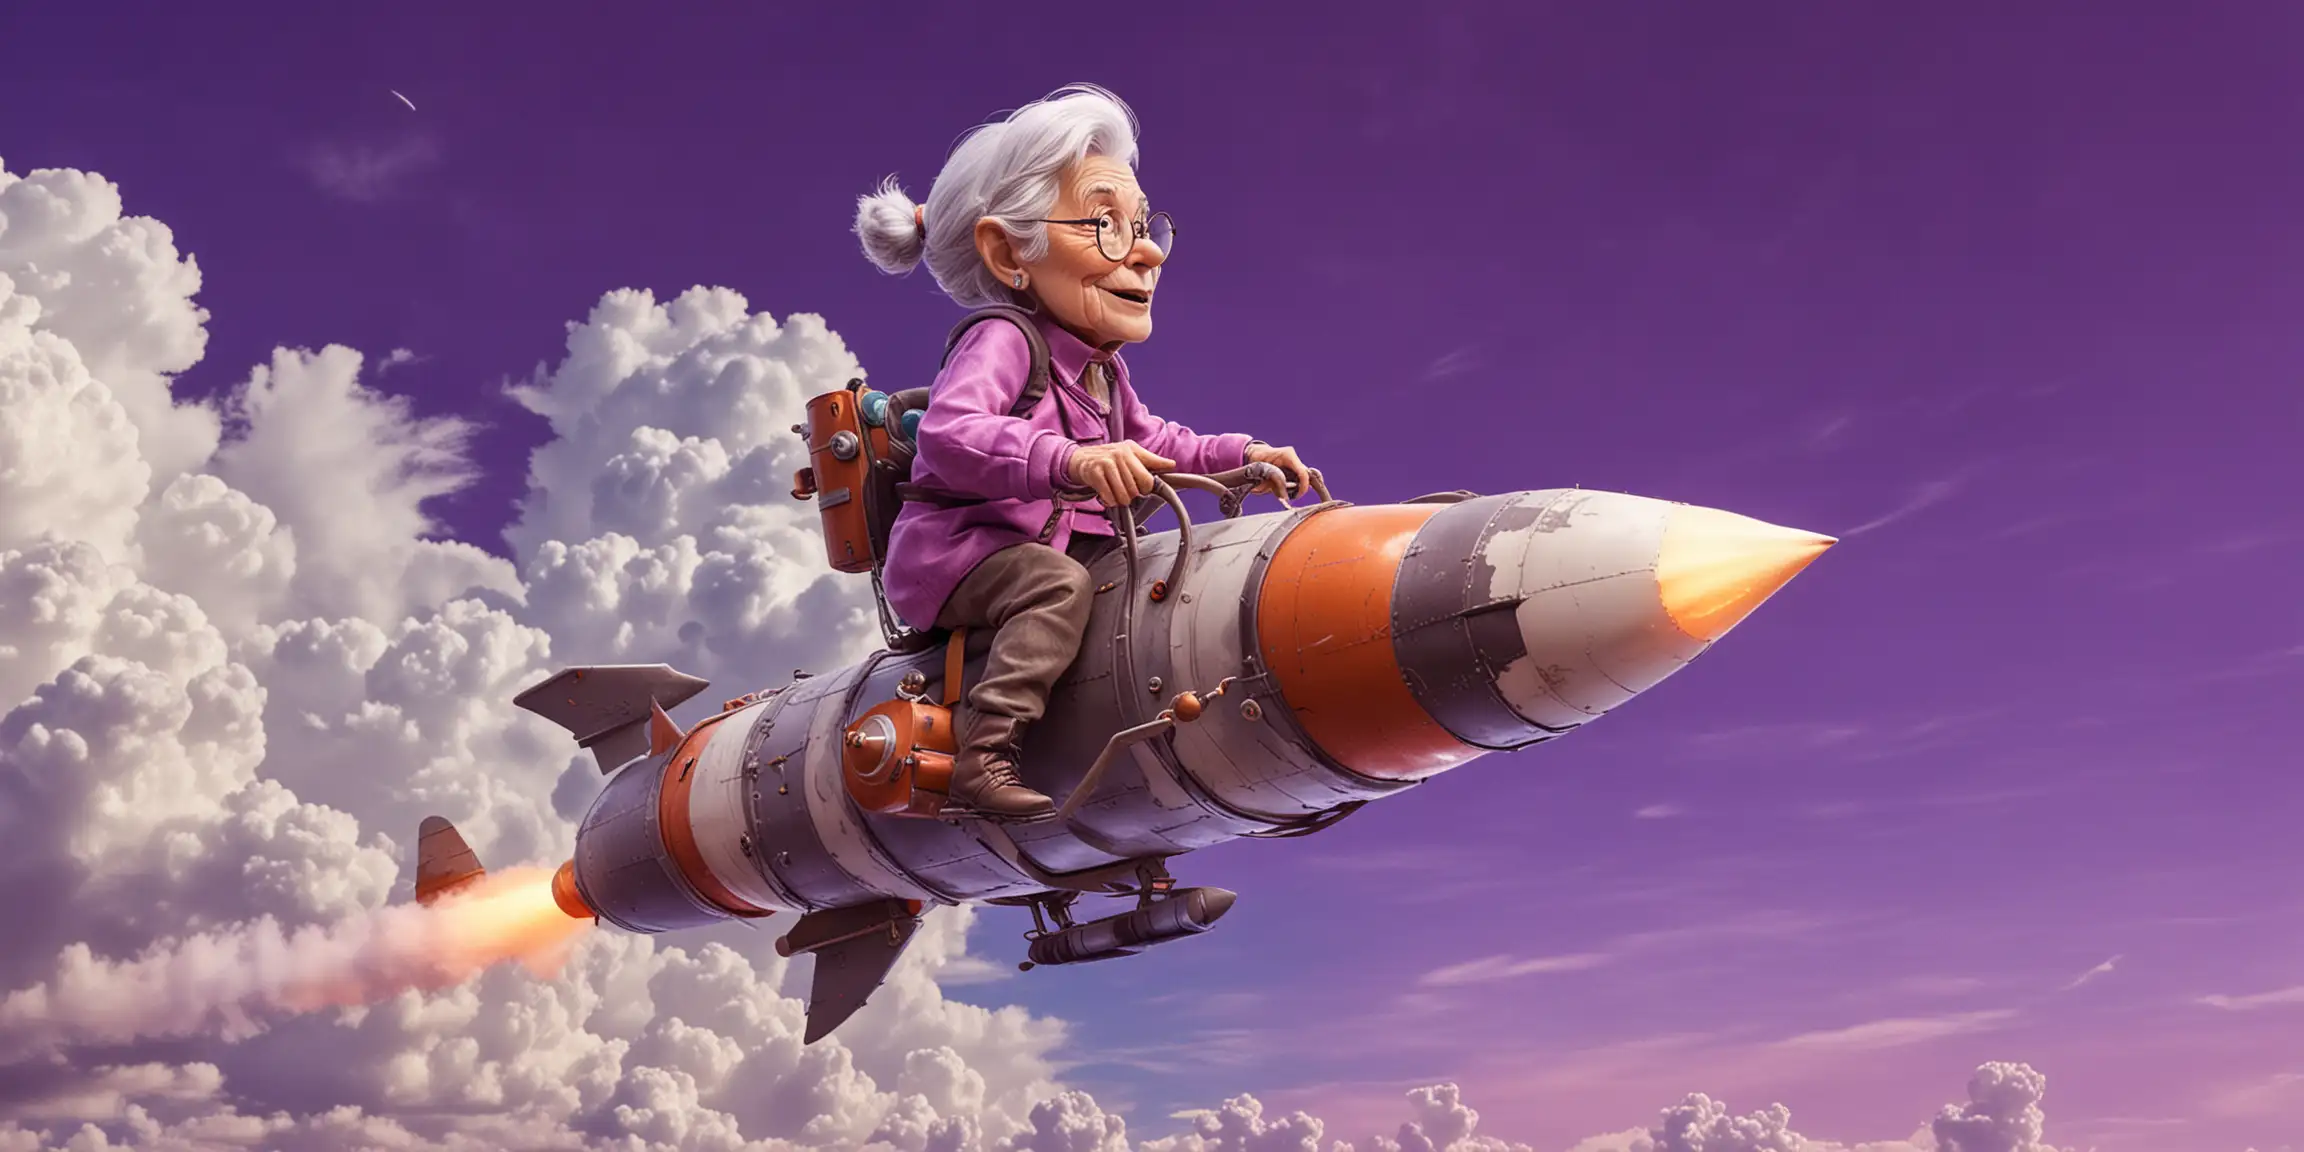 Elderly Woman Riding Rocket in Vibrant Violet Sky with Puffy Clouds